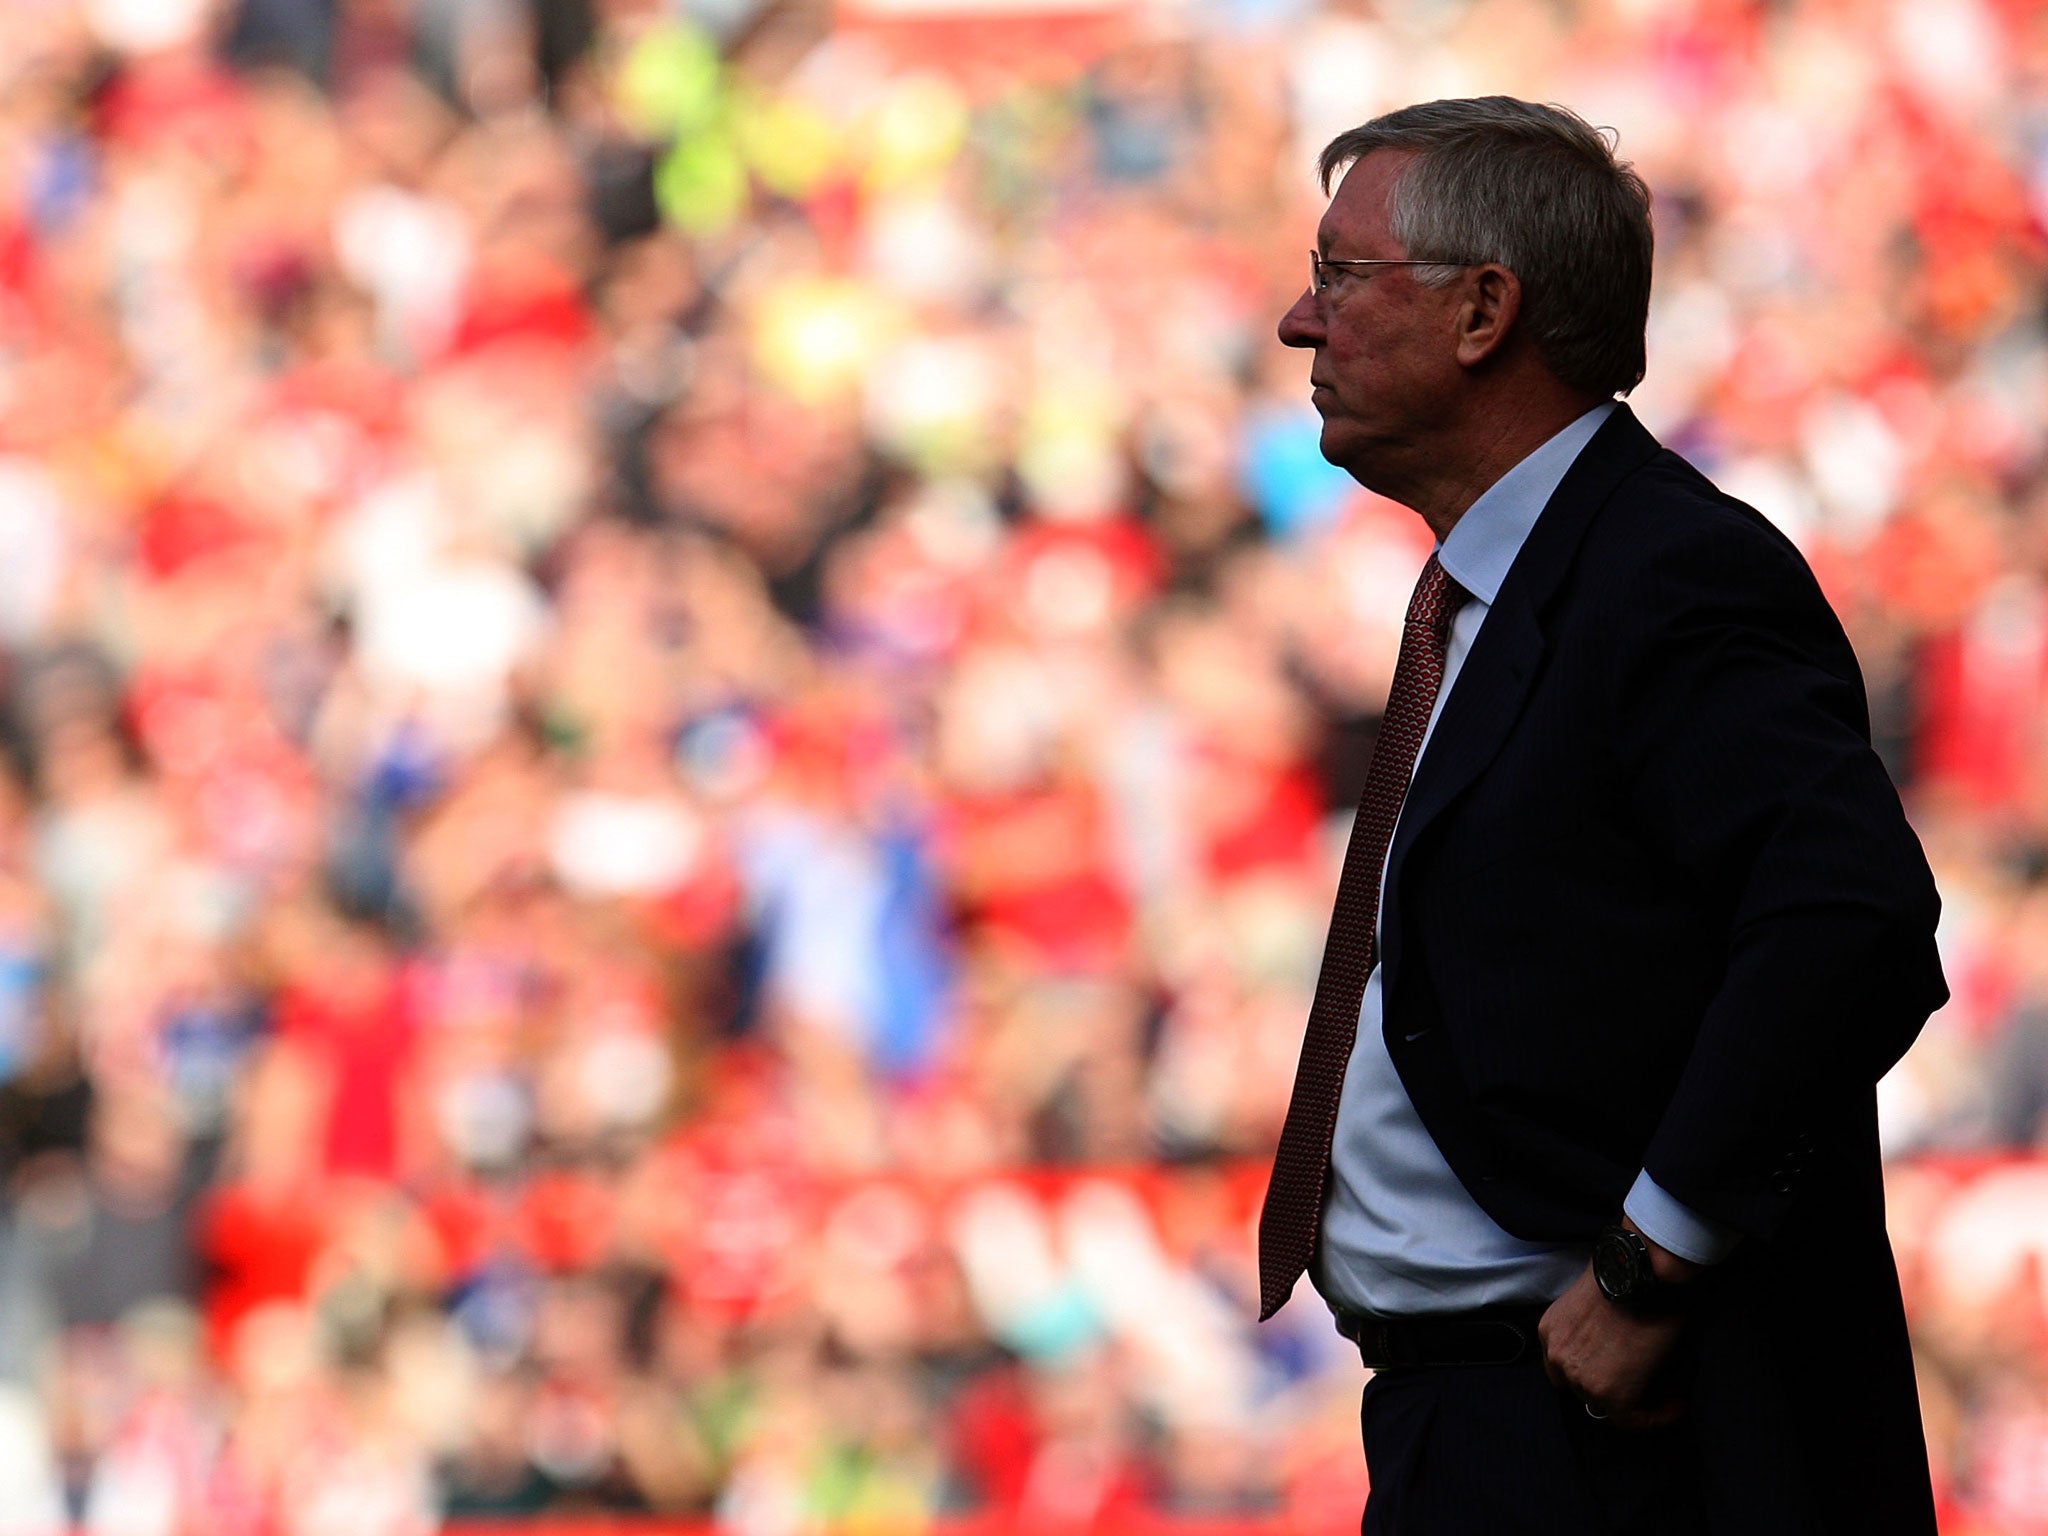 Sir Alex Ferguson of Manchester United watches from the touchline during the Barclays Premier League match between Manchester United and Chelsea at Old Trafford on September 18, 2011 in Manchester, England.